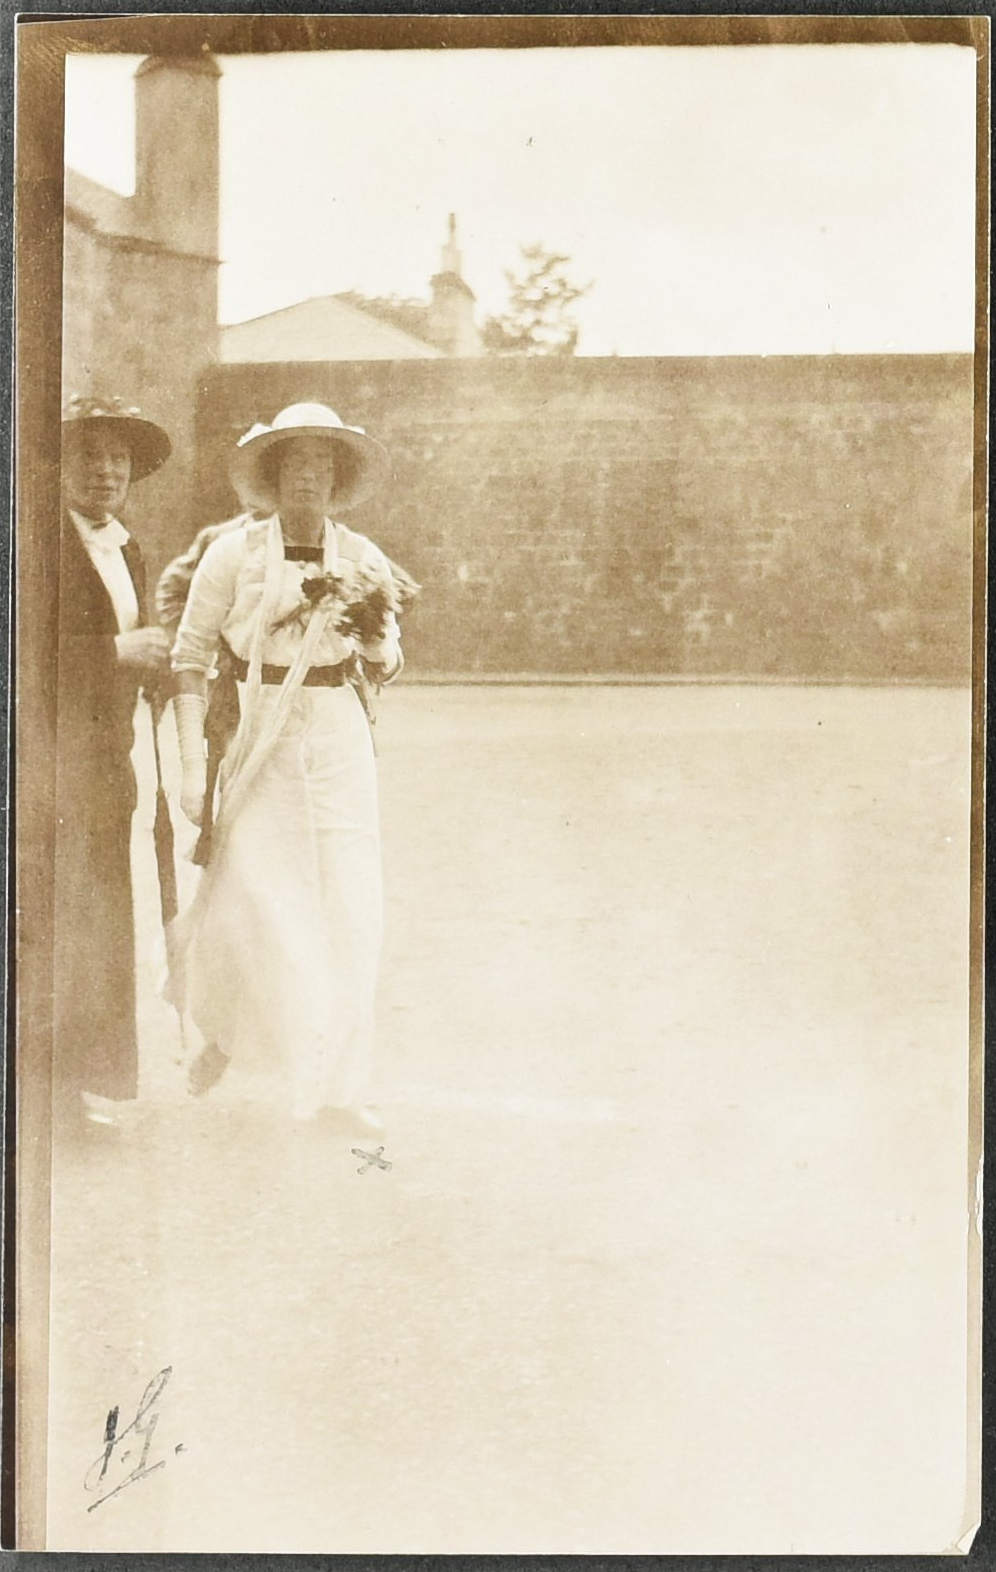 Photograph of Maude Edwards in a white dress with another woman by her side.